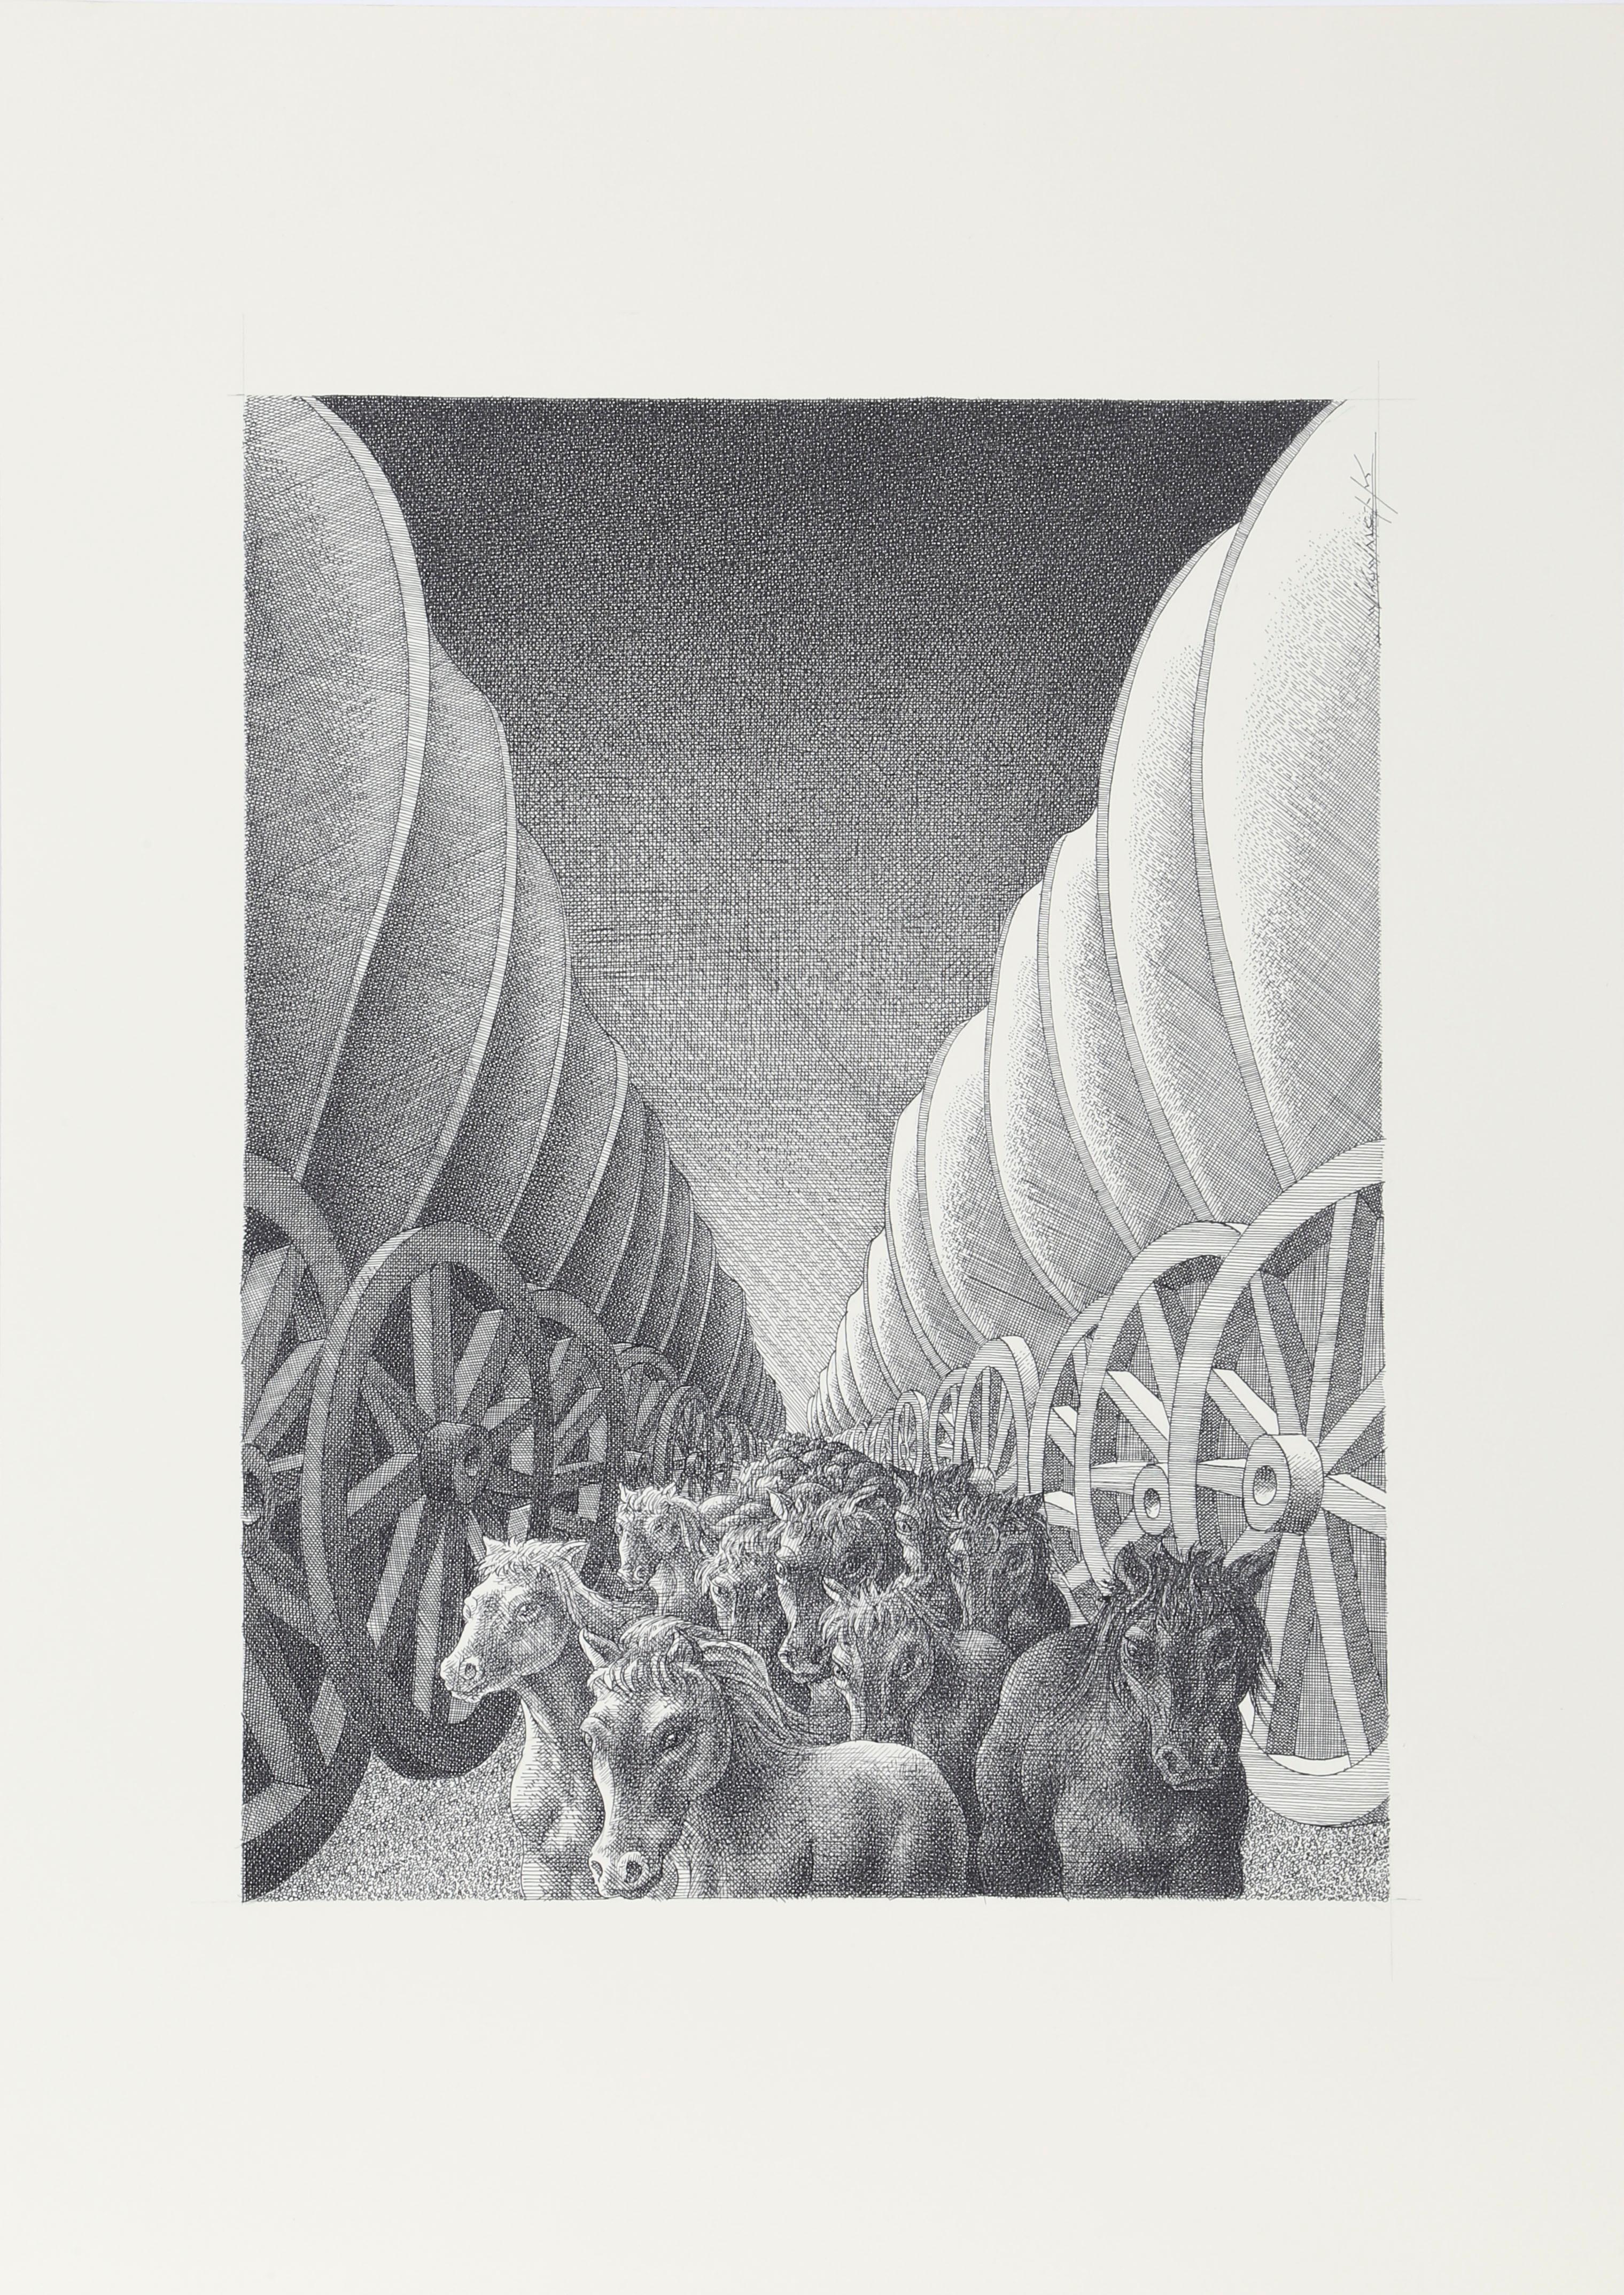 In this detailed, hand-drawn and drafted work in ink on paper by Polish artist Wojtek Kowalczyk, a stampede of horses runs down the center of the composition. Markedly though, the horses are significantly smaller than the giant caravans that flank